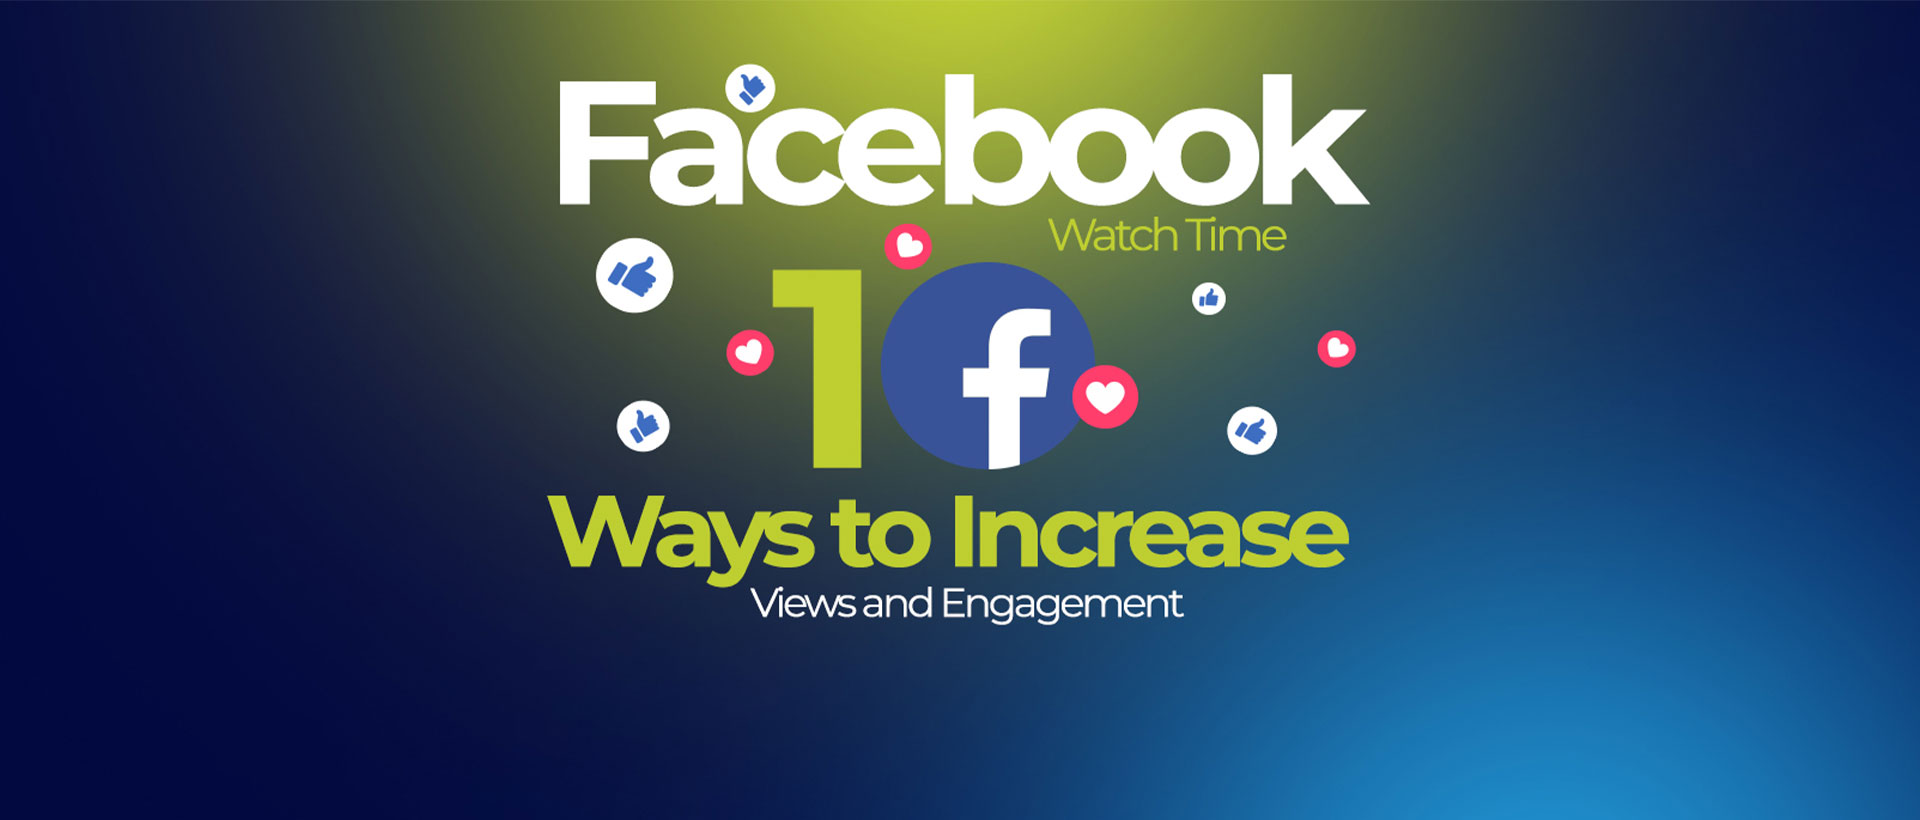 Facebook Watch Time: 10 Ways to Increase Views and Engagement